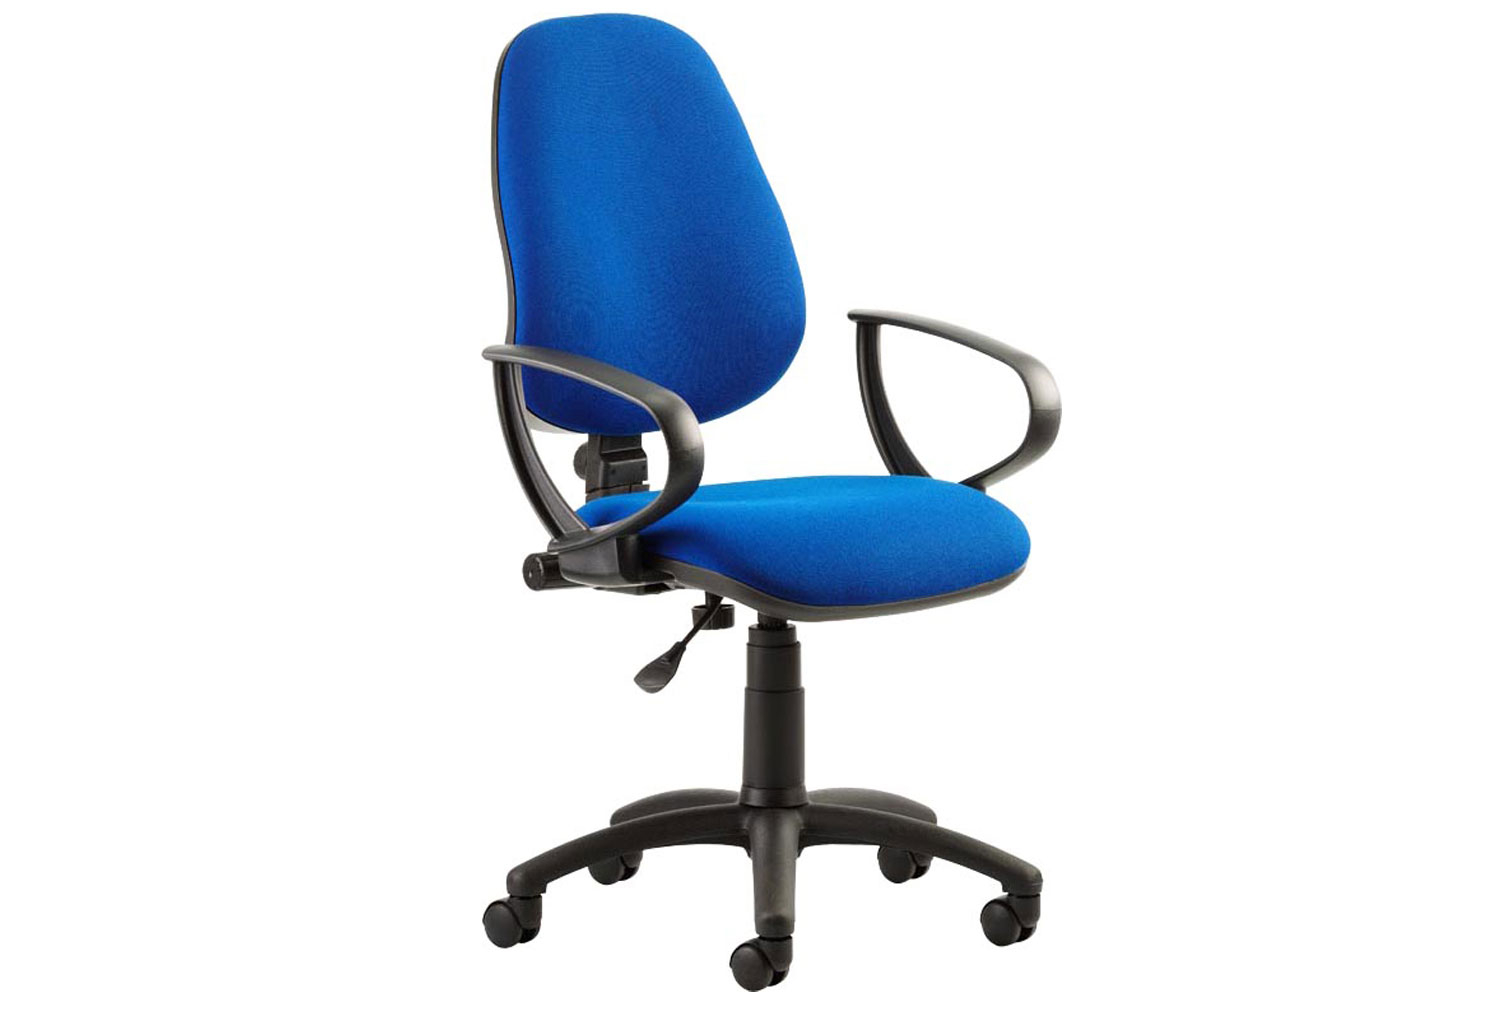 Lunar 1 Lever Operator Office Chair With Fixed Arms, Blue, Express Delivery